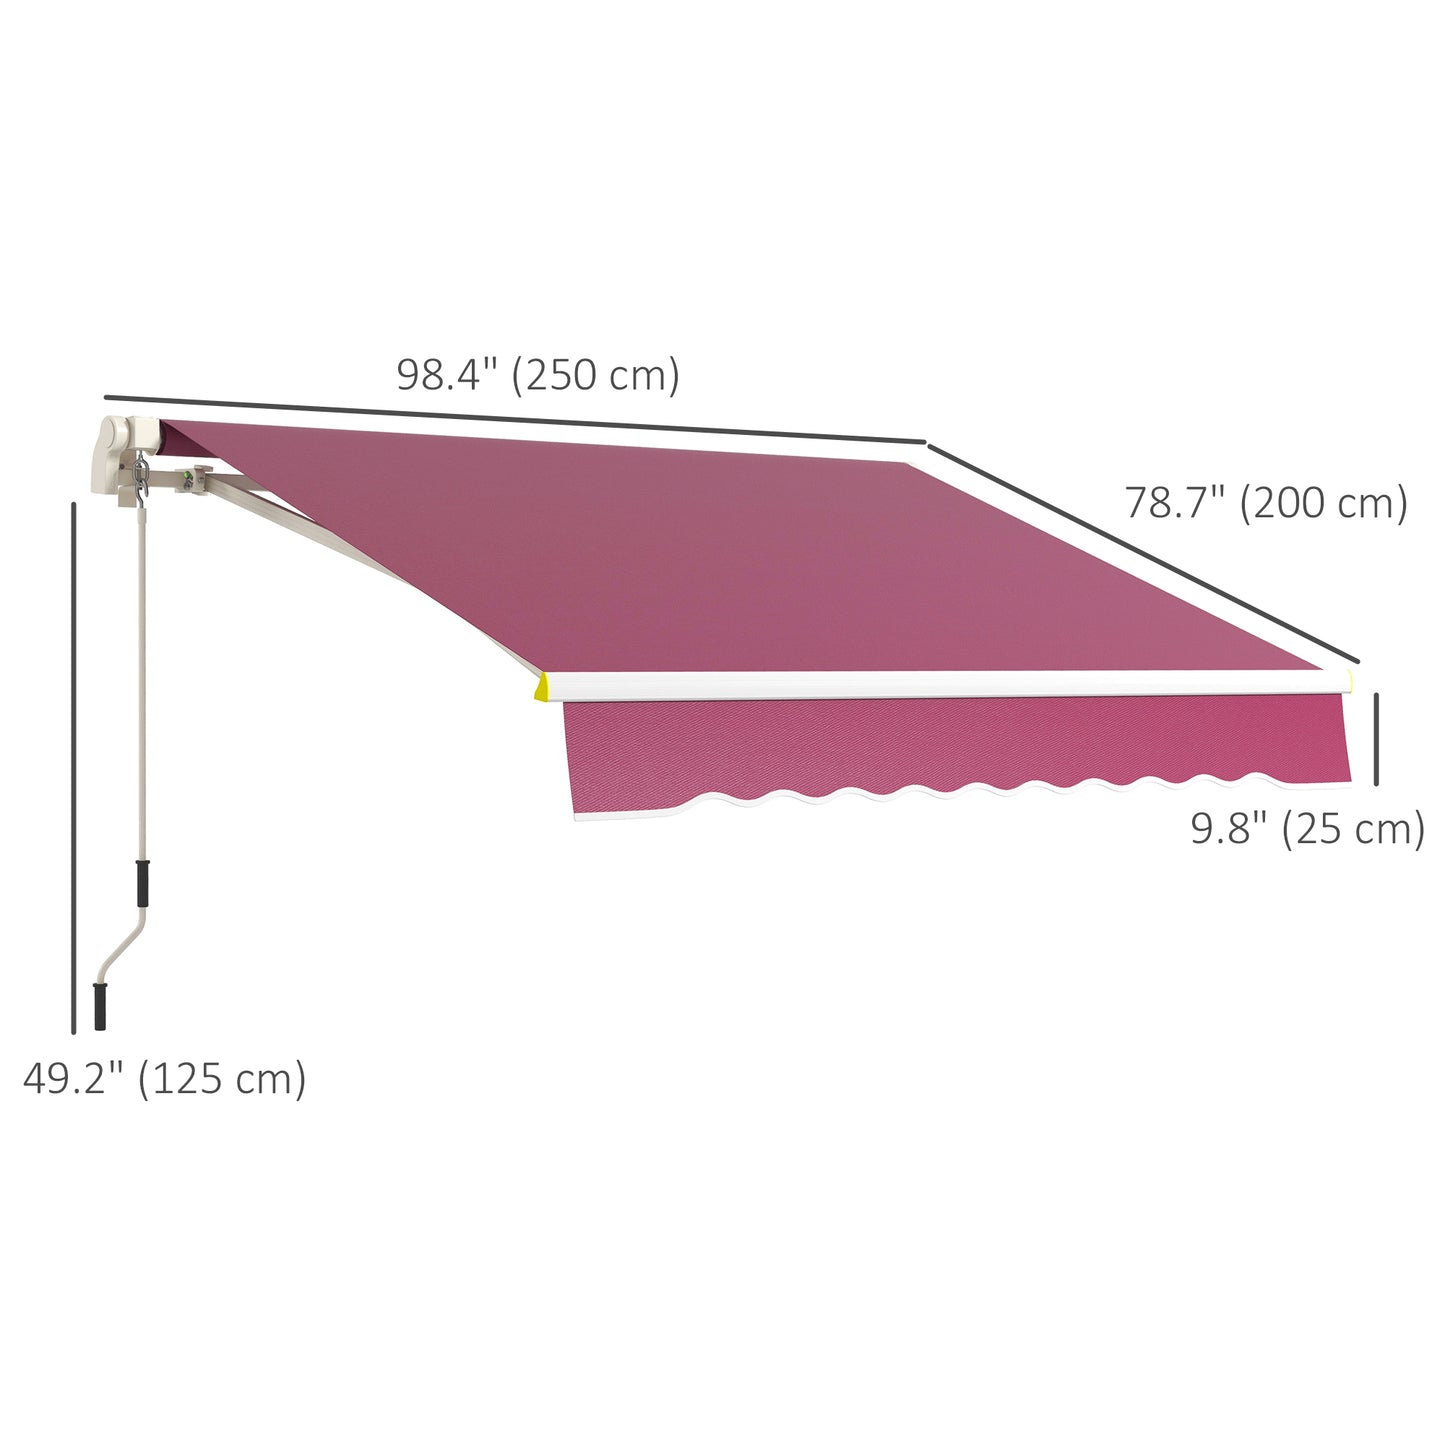 8' x 6.5' Manual Retractable Awning with LED Lights, Aluminum Sun Canopies for Patio Door Window, Wine Red